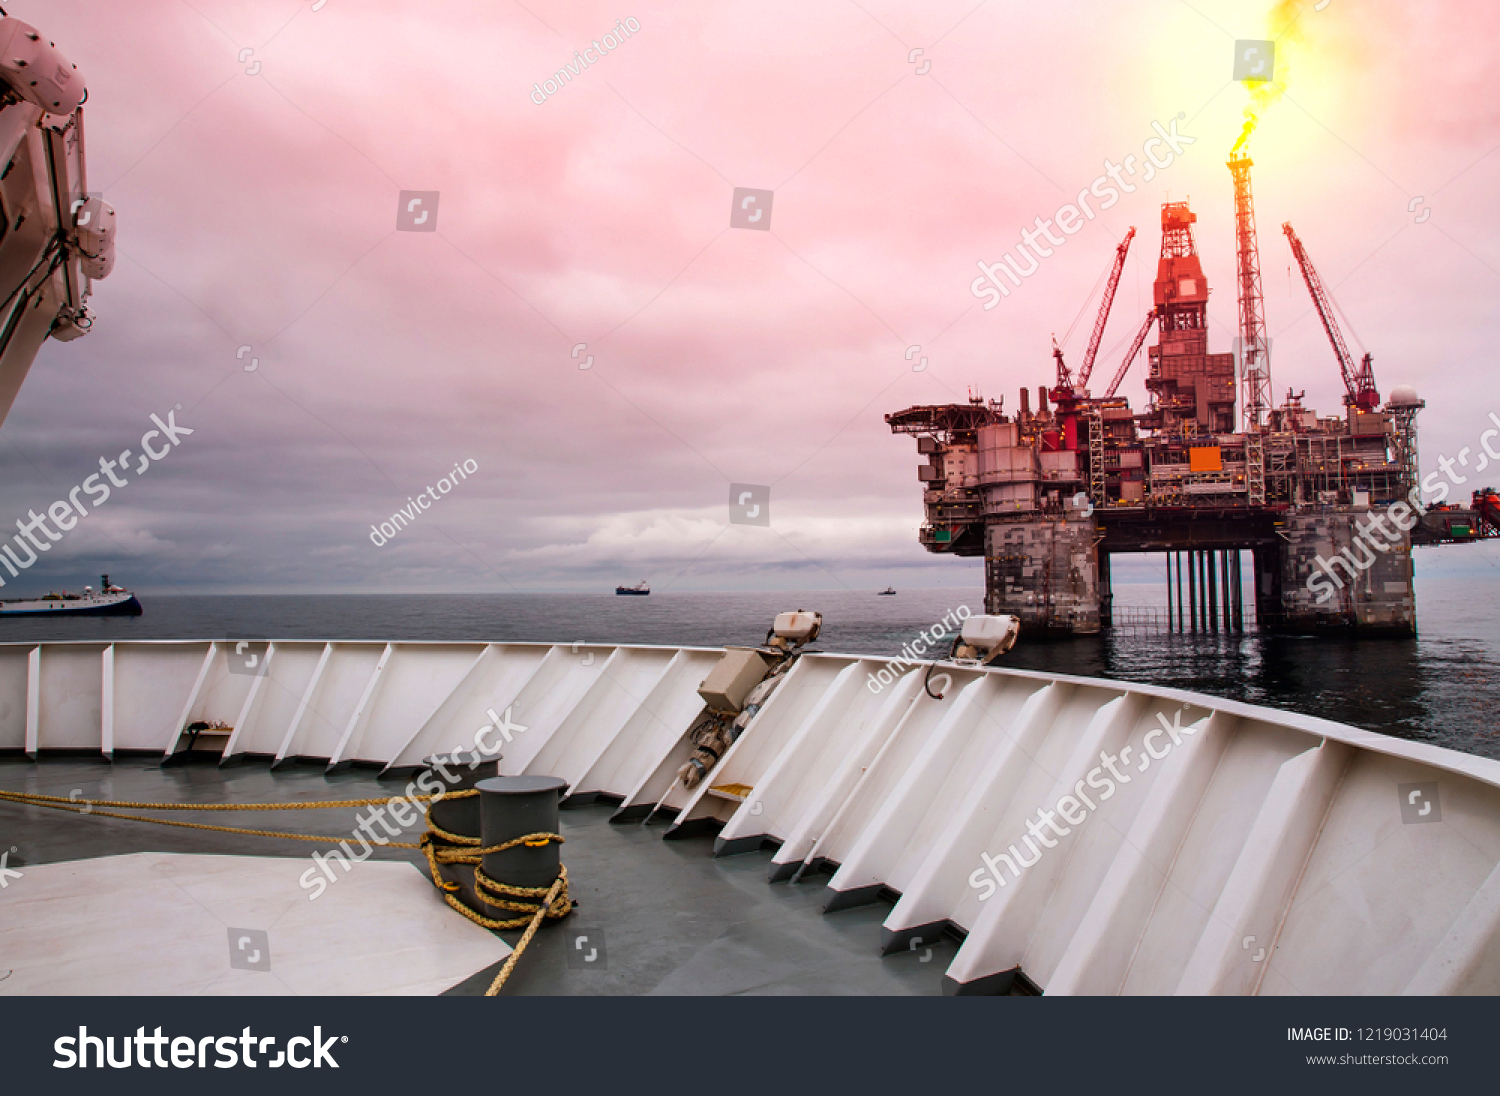 Platform support vessels and seismic boats at close distance to Norwegian Drill Rig on North Sea #1219031404